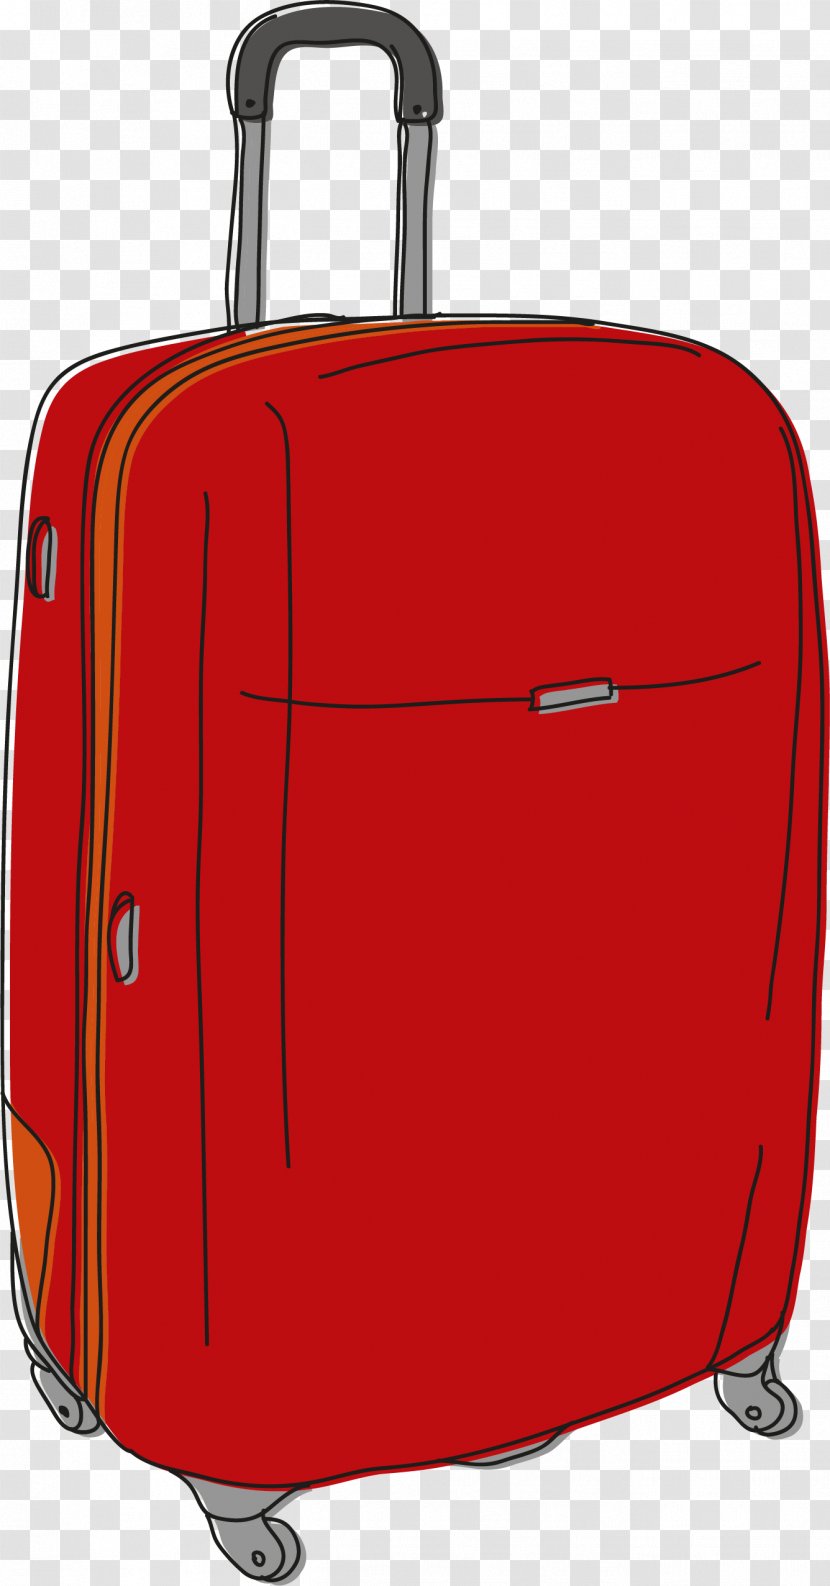 Hand Luggage Suitcase Baggage Drawing - Painted Red Transparent PNG